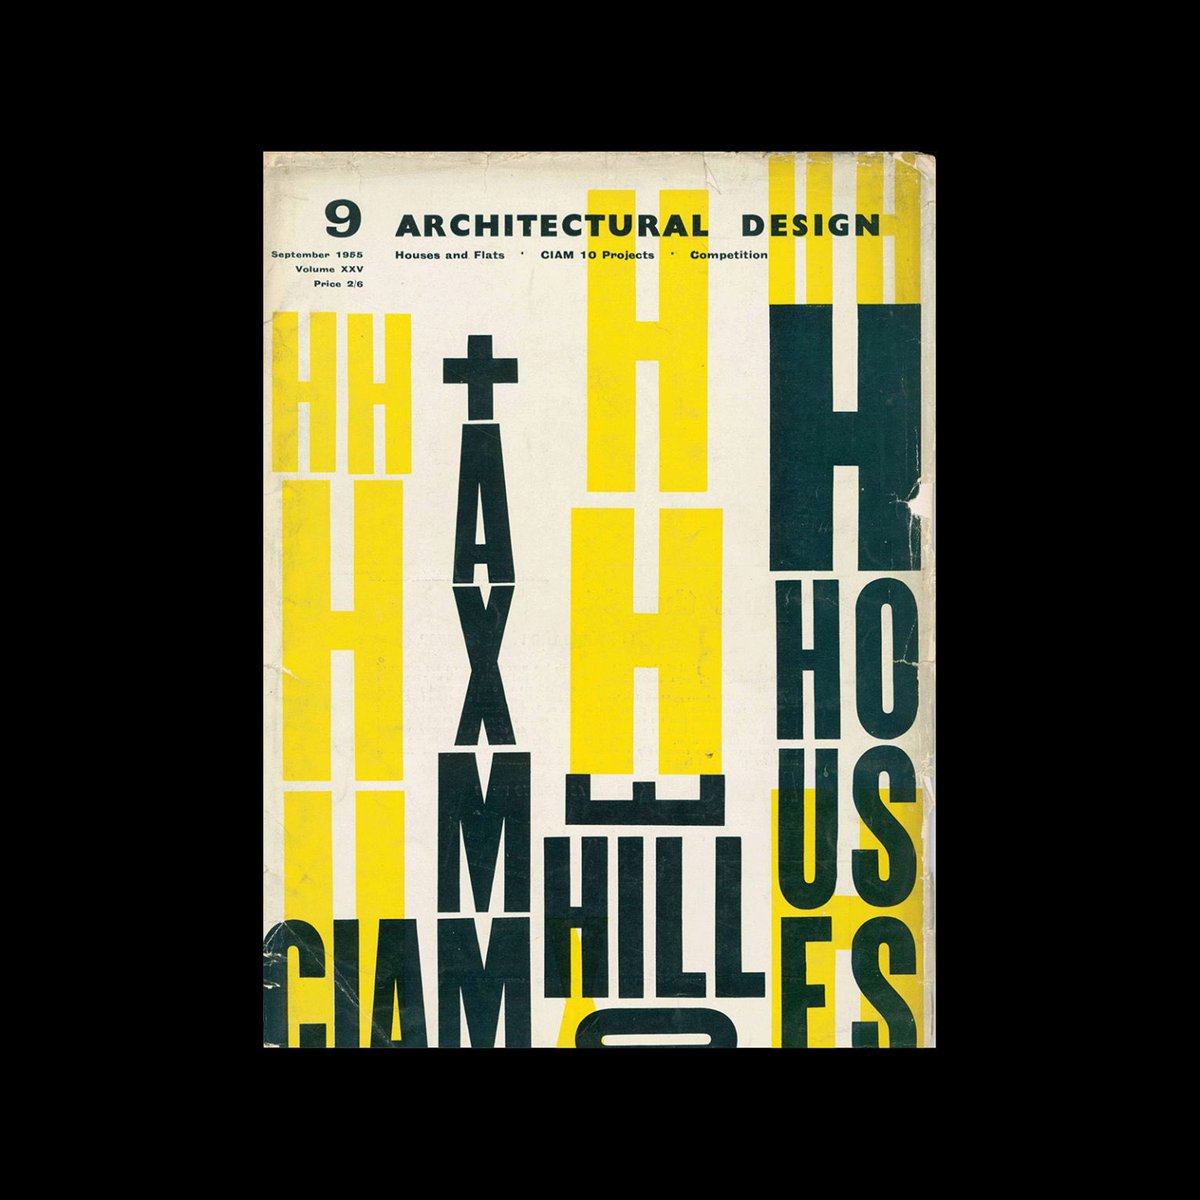 Architectural Design, September 1965. Cover design by Theo Crosby #theocrosby